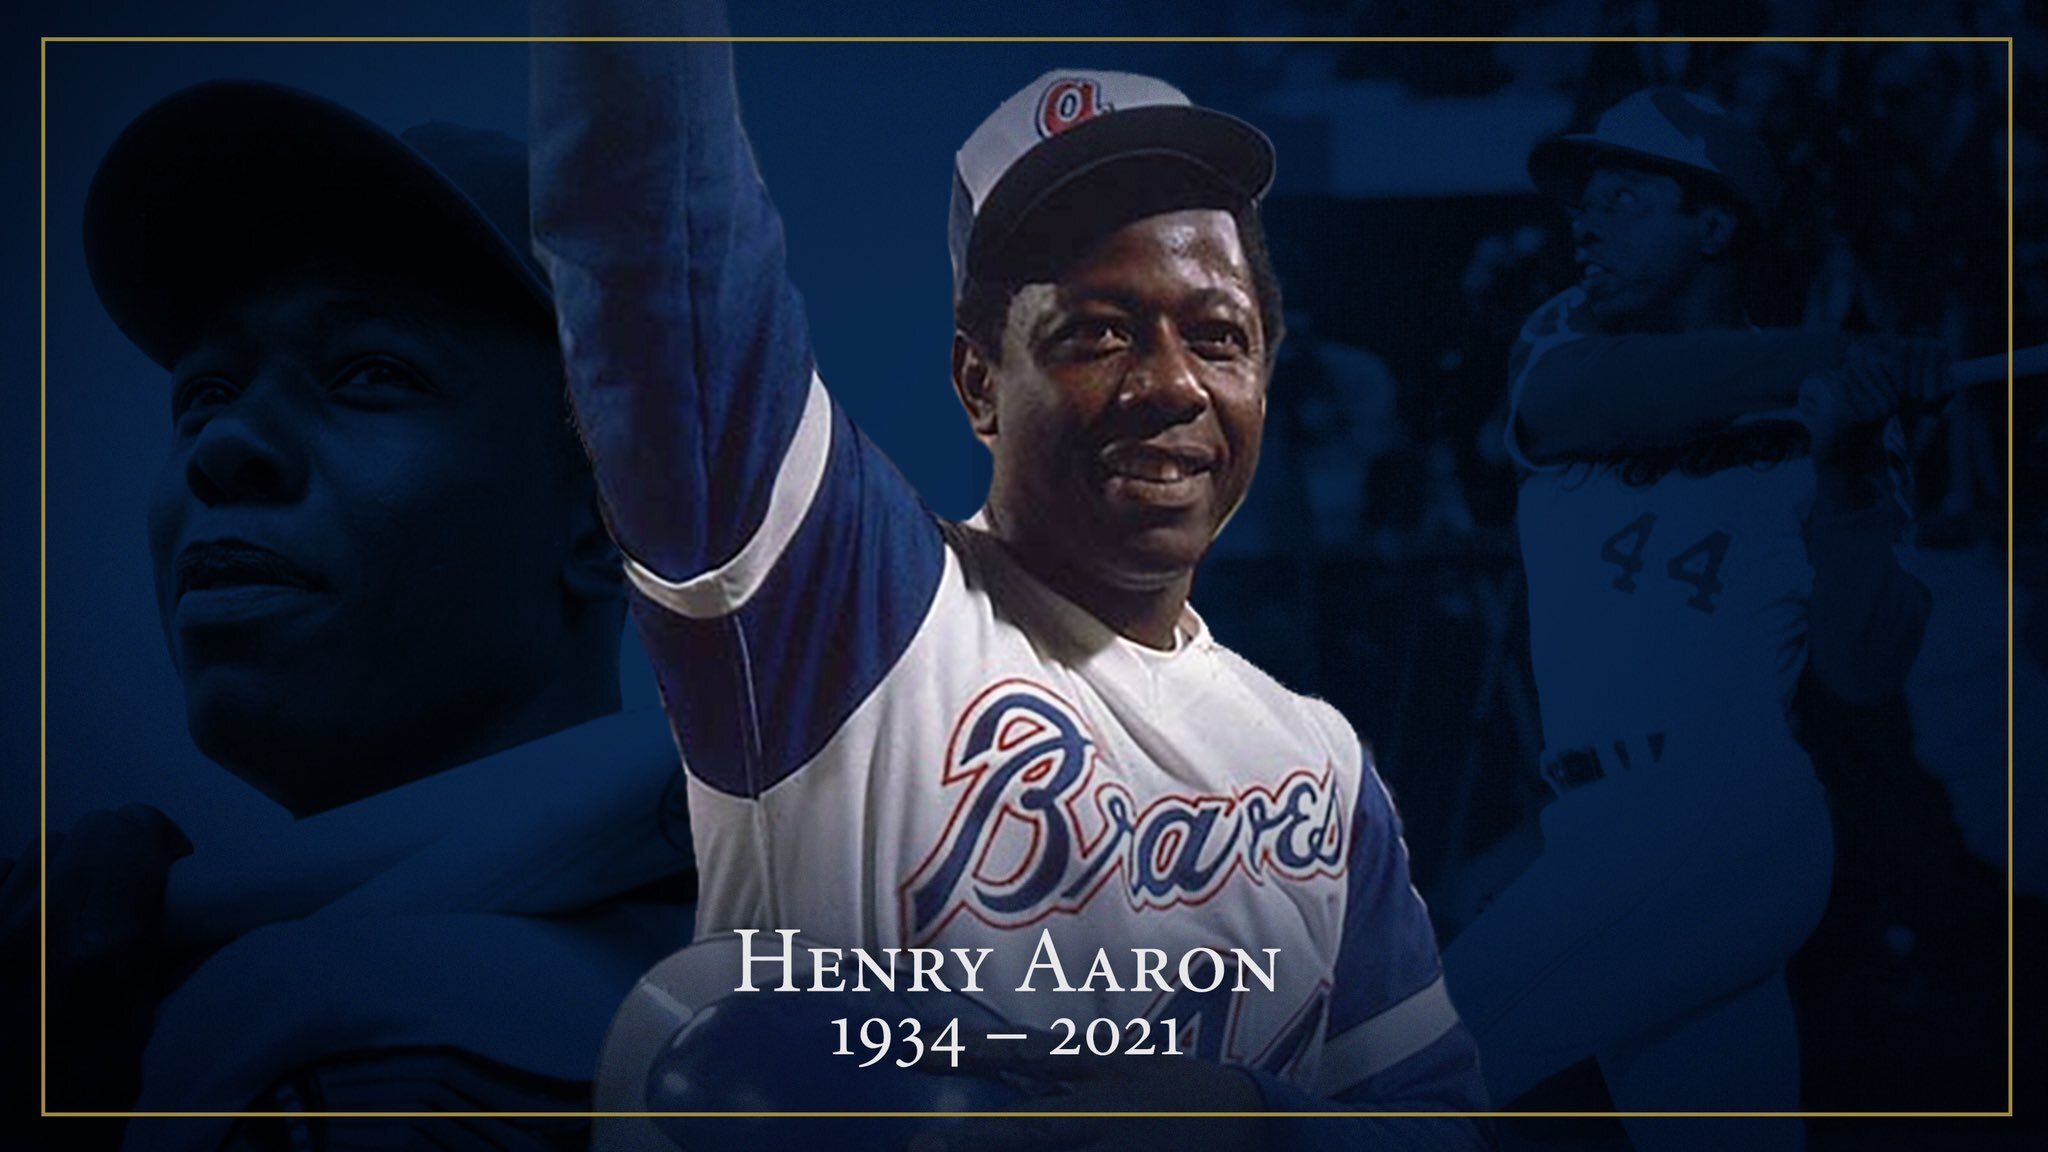 Hank Aaron, baseball legend and former home run king, dies at 86 Southwest Florida